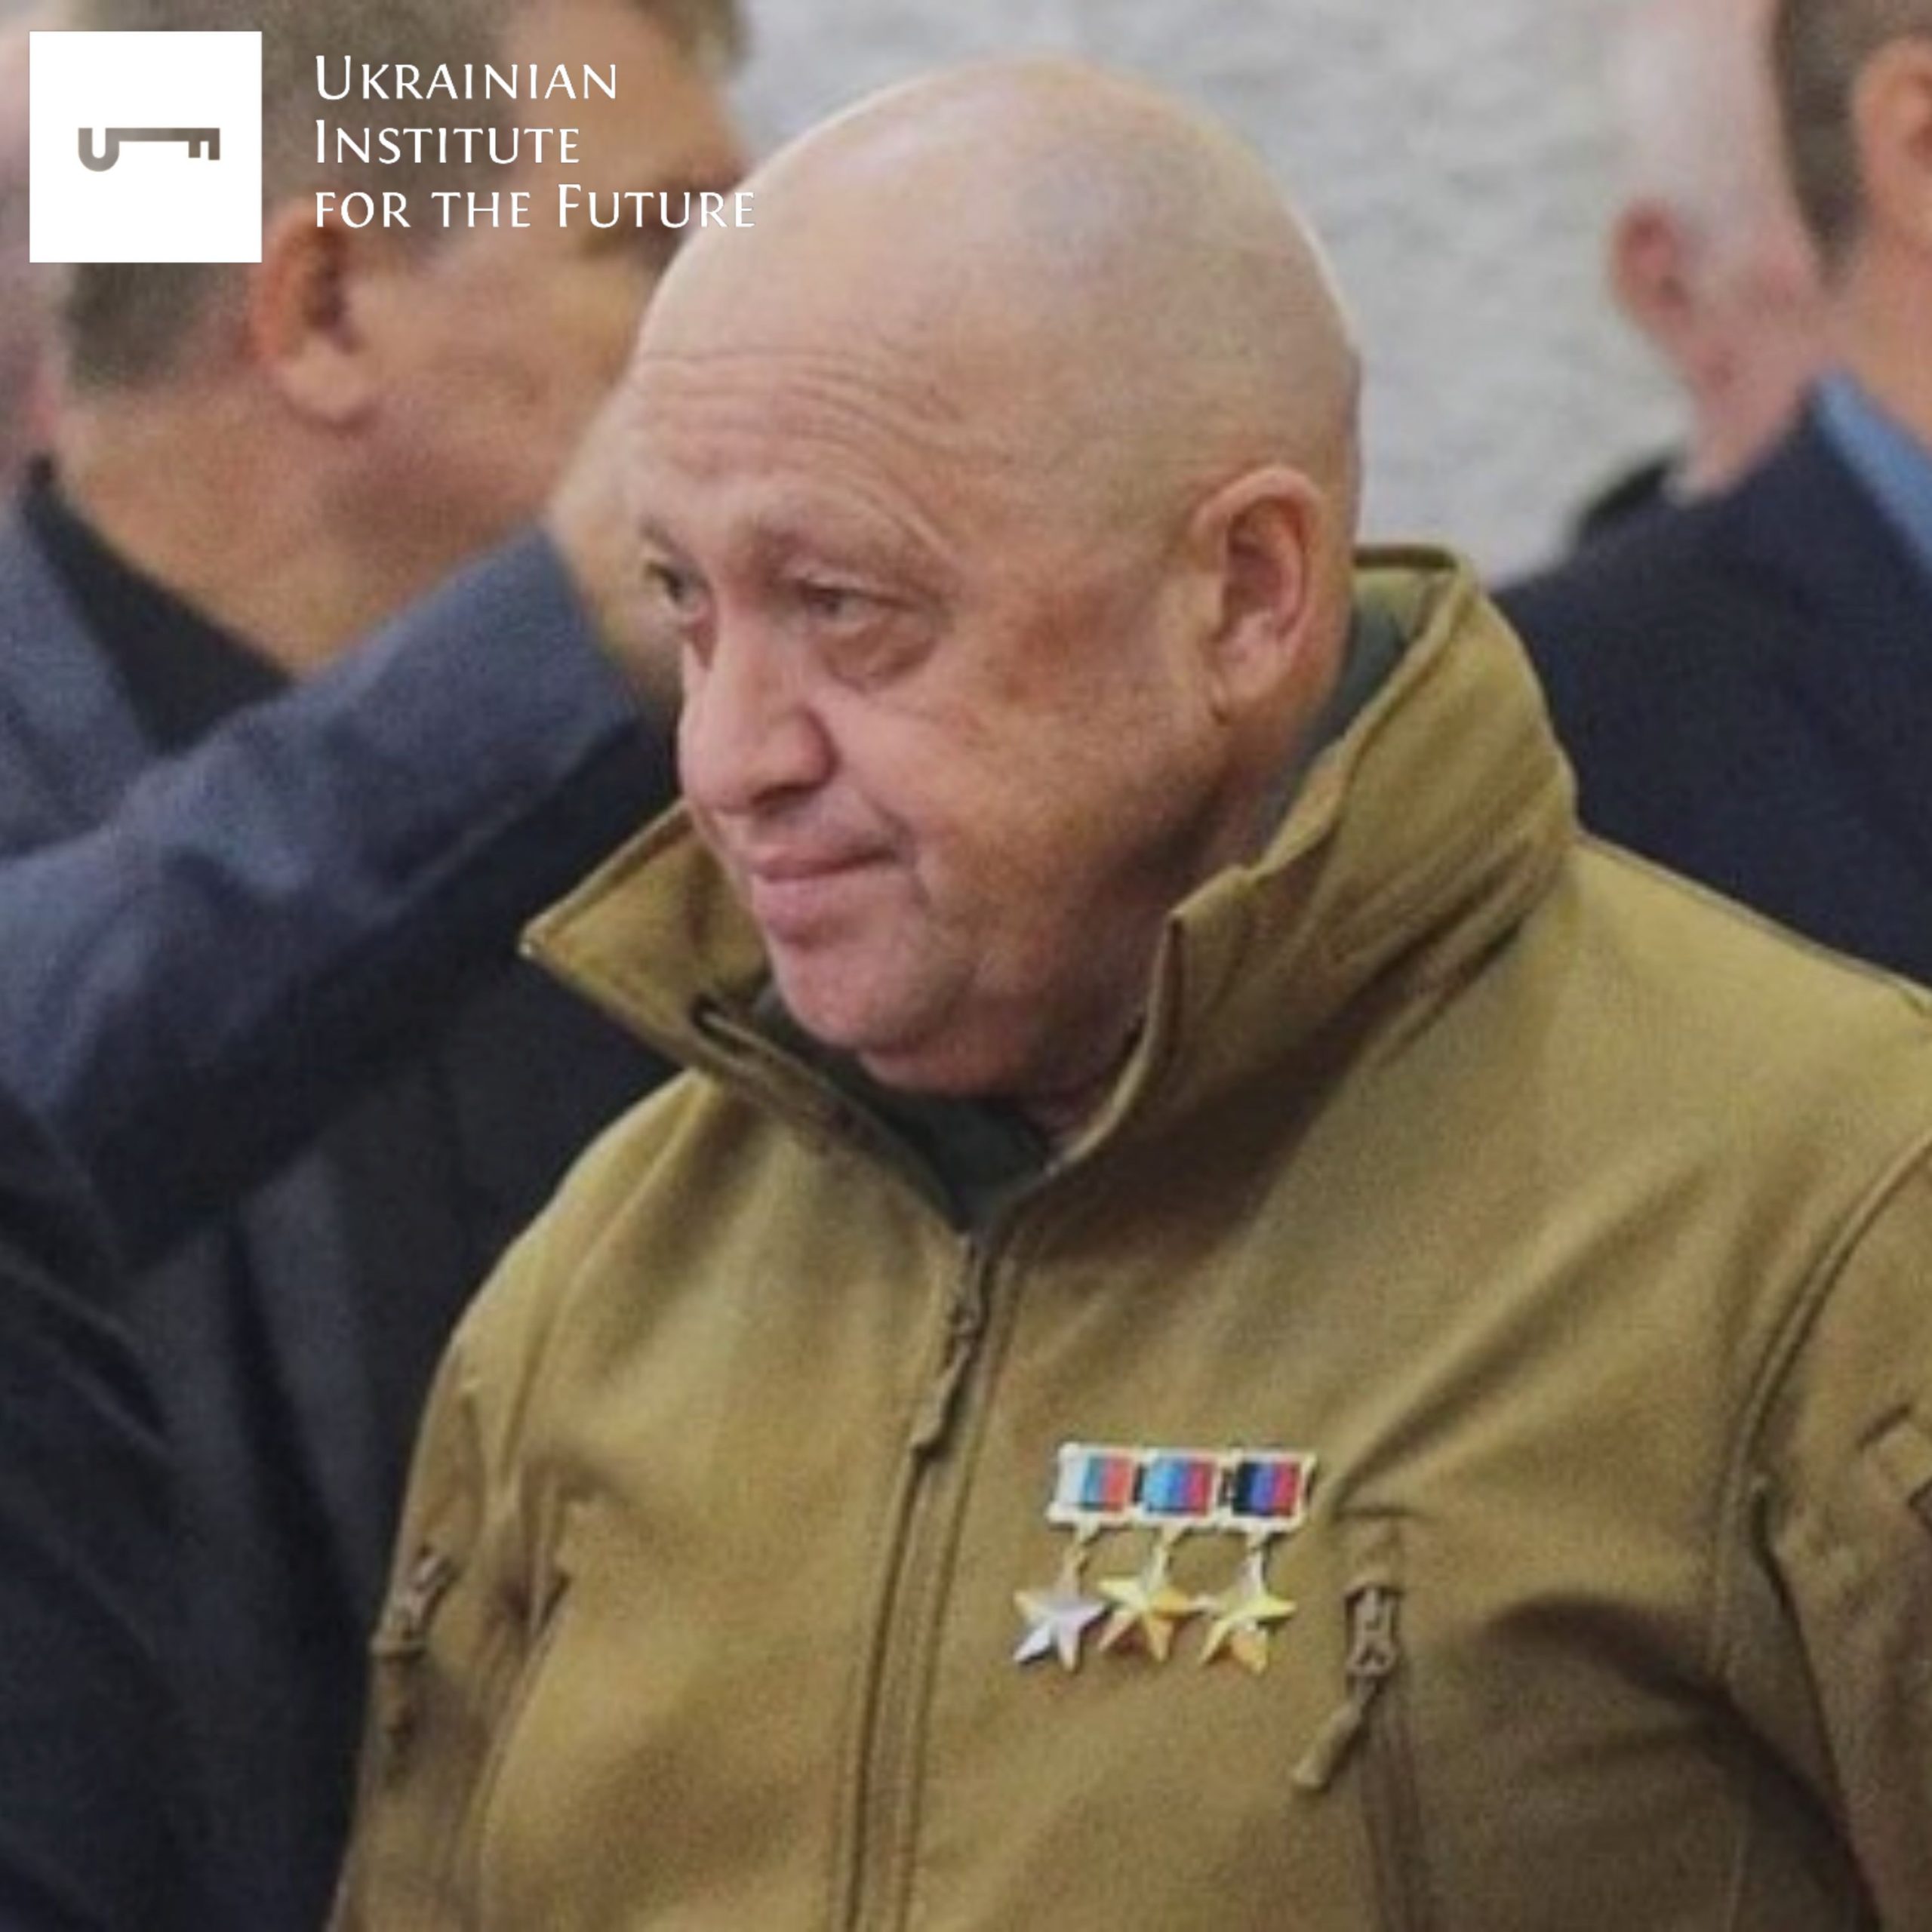 Where Yevgeny Prigozhin is withdrawing his army